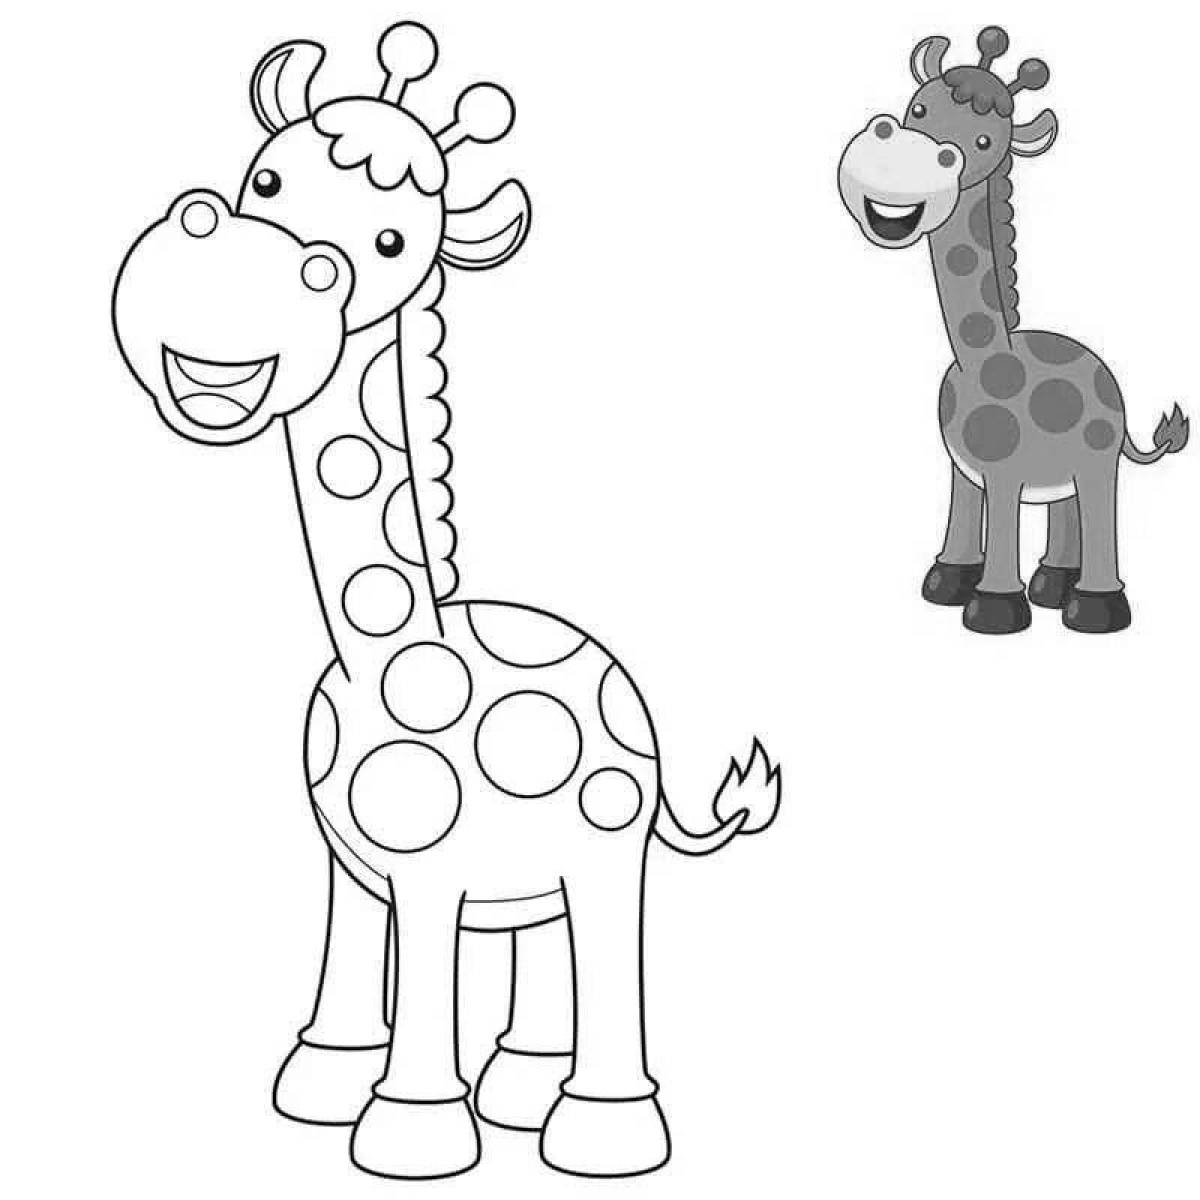 Playful giraffe coloring page for kids